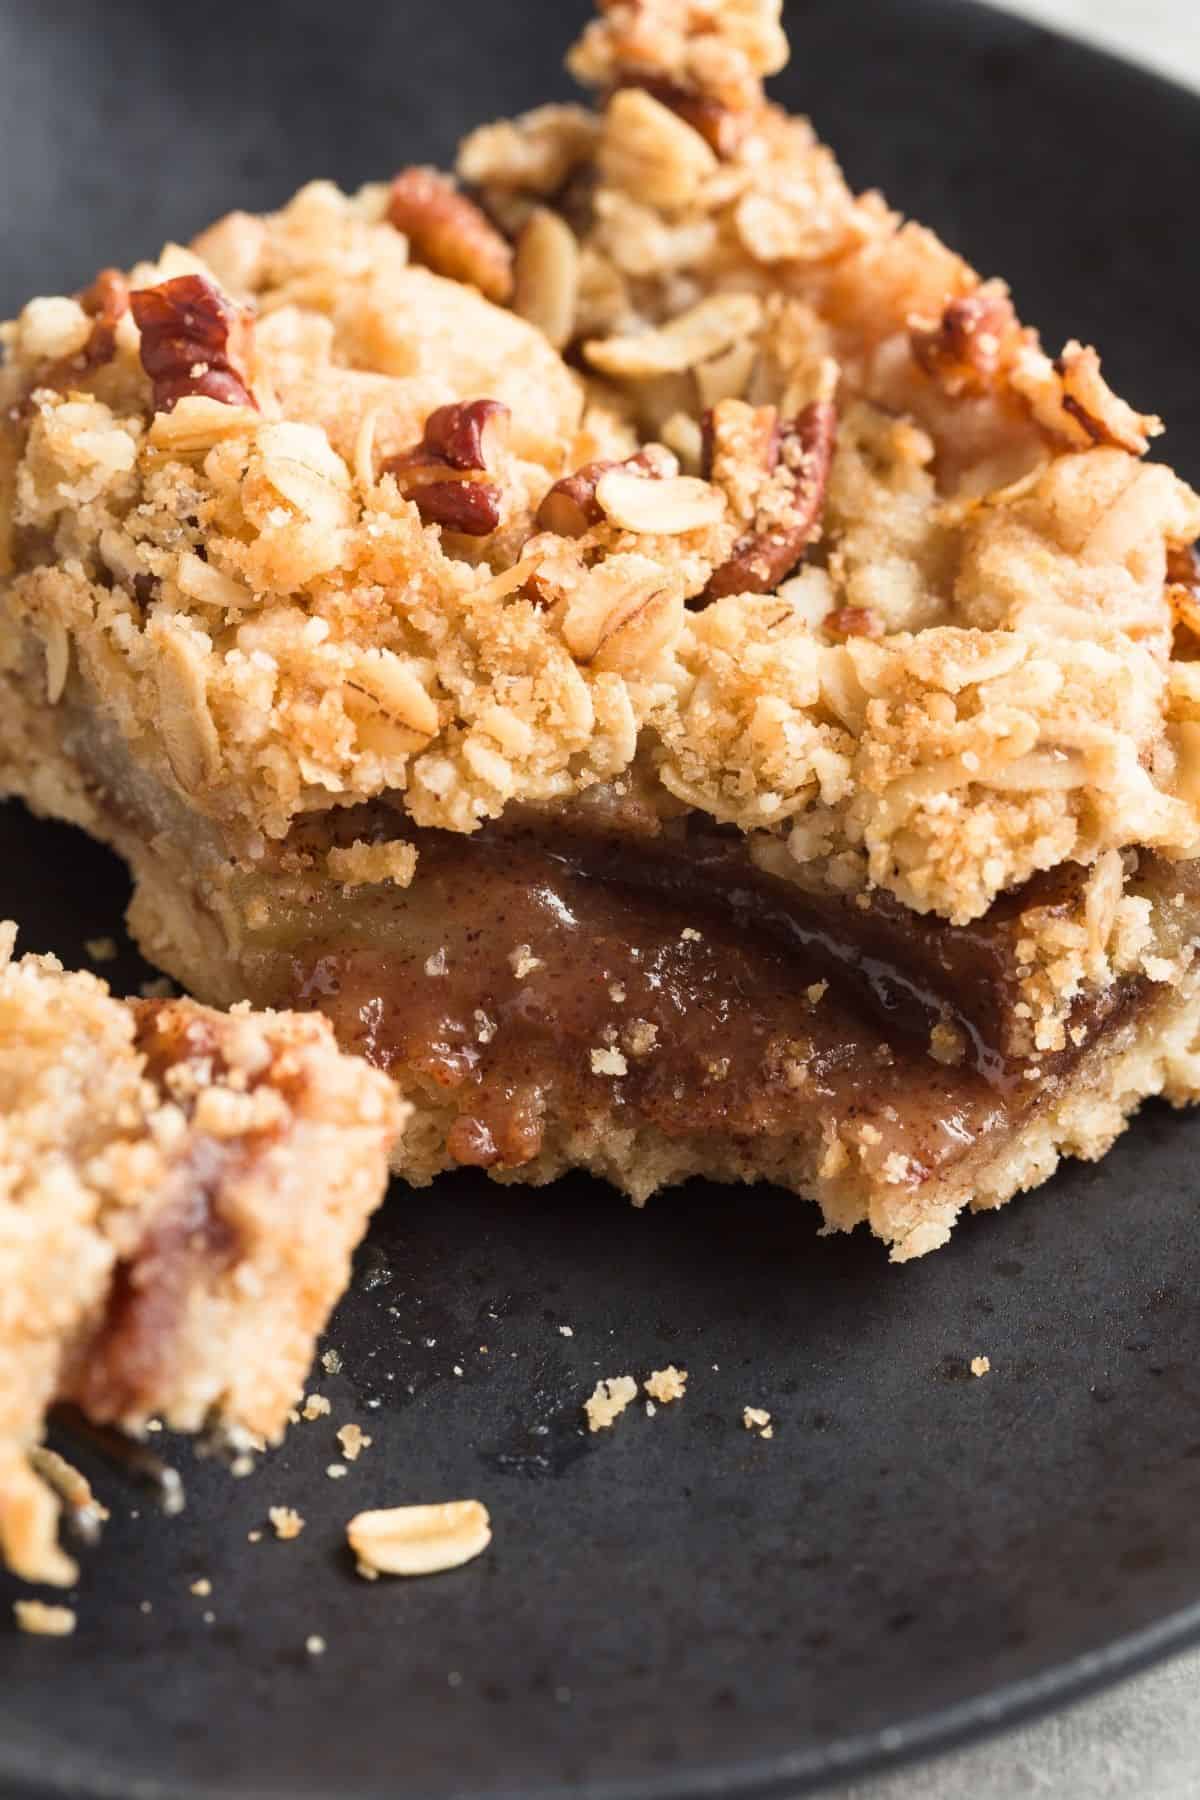 A close up view of an apple streusel bar on a black plate with a fork taking a bite out so the gooey apple filling is visible.